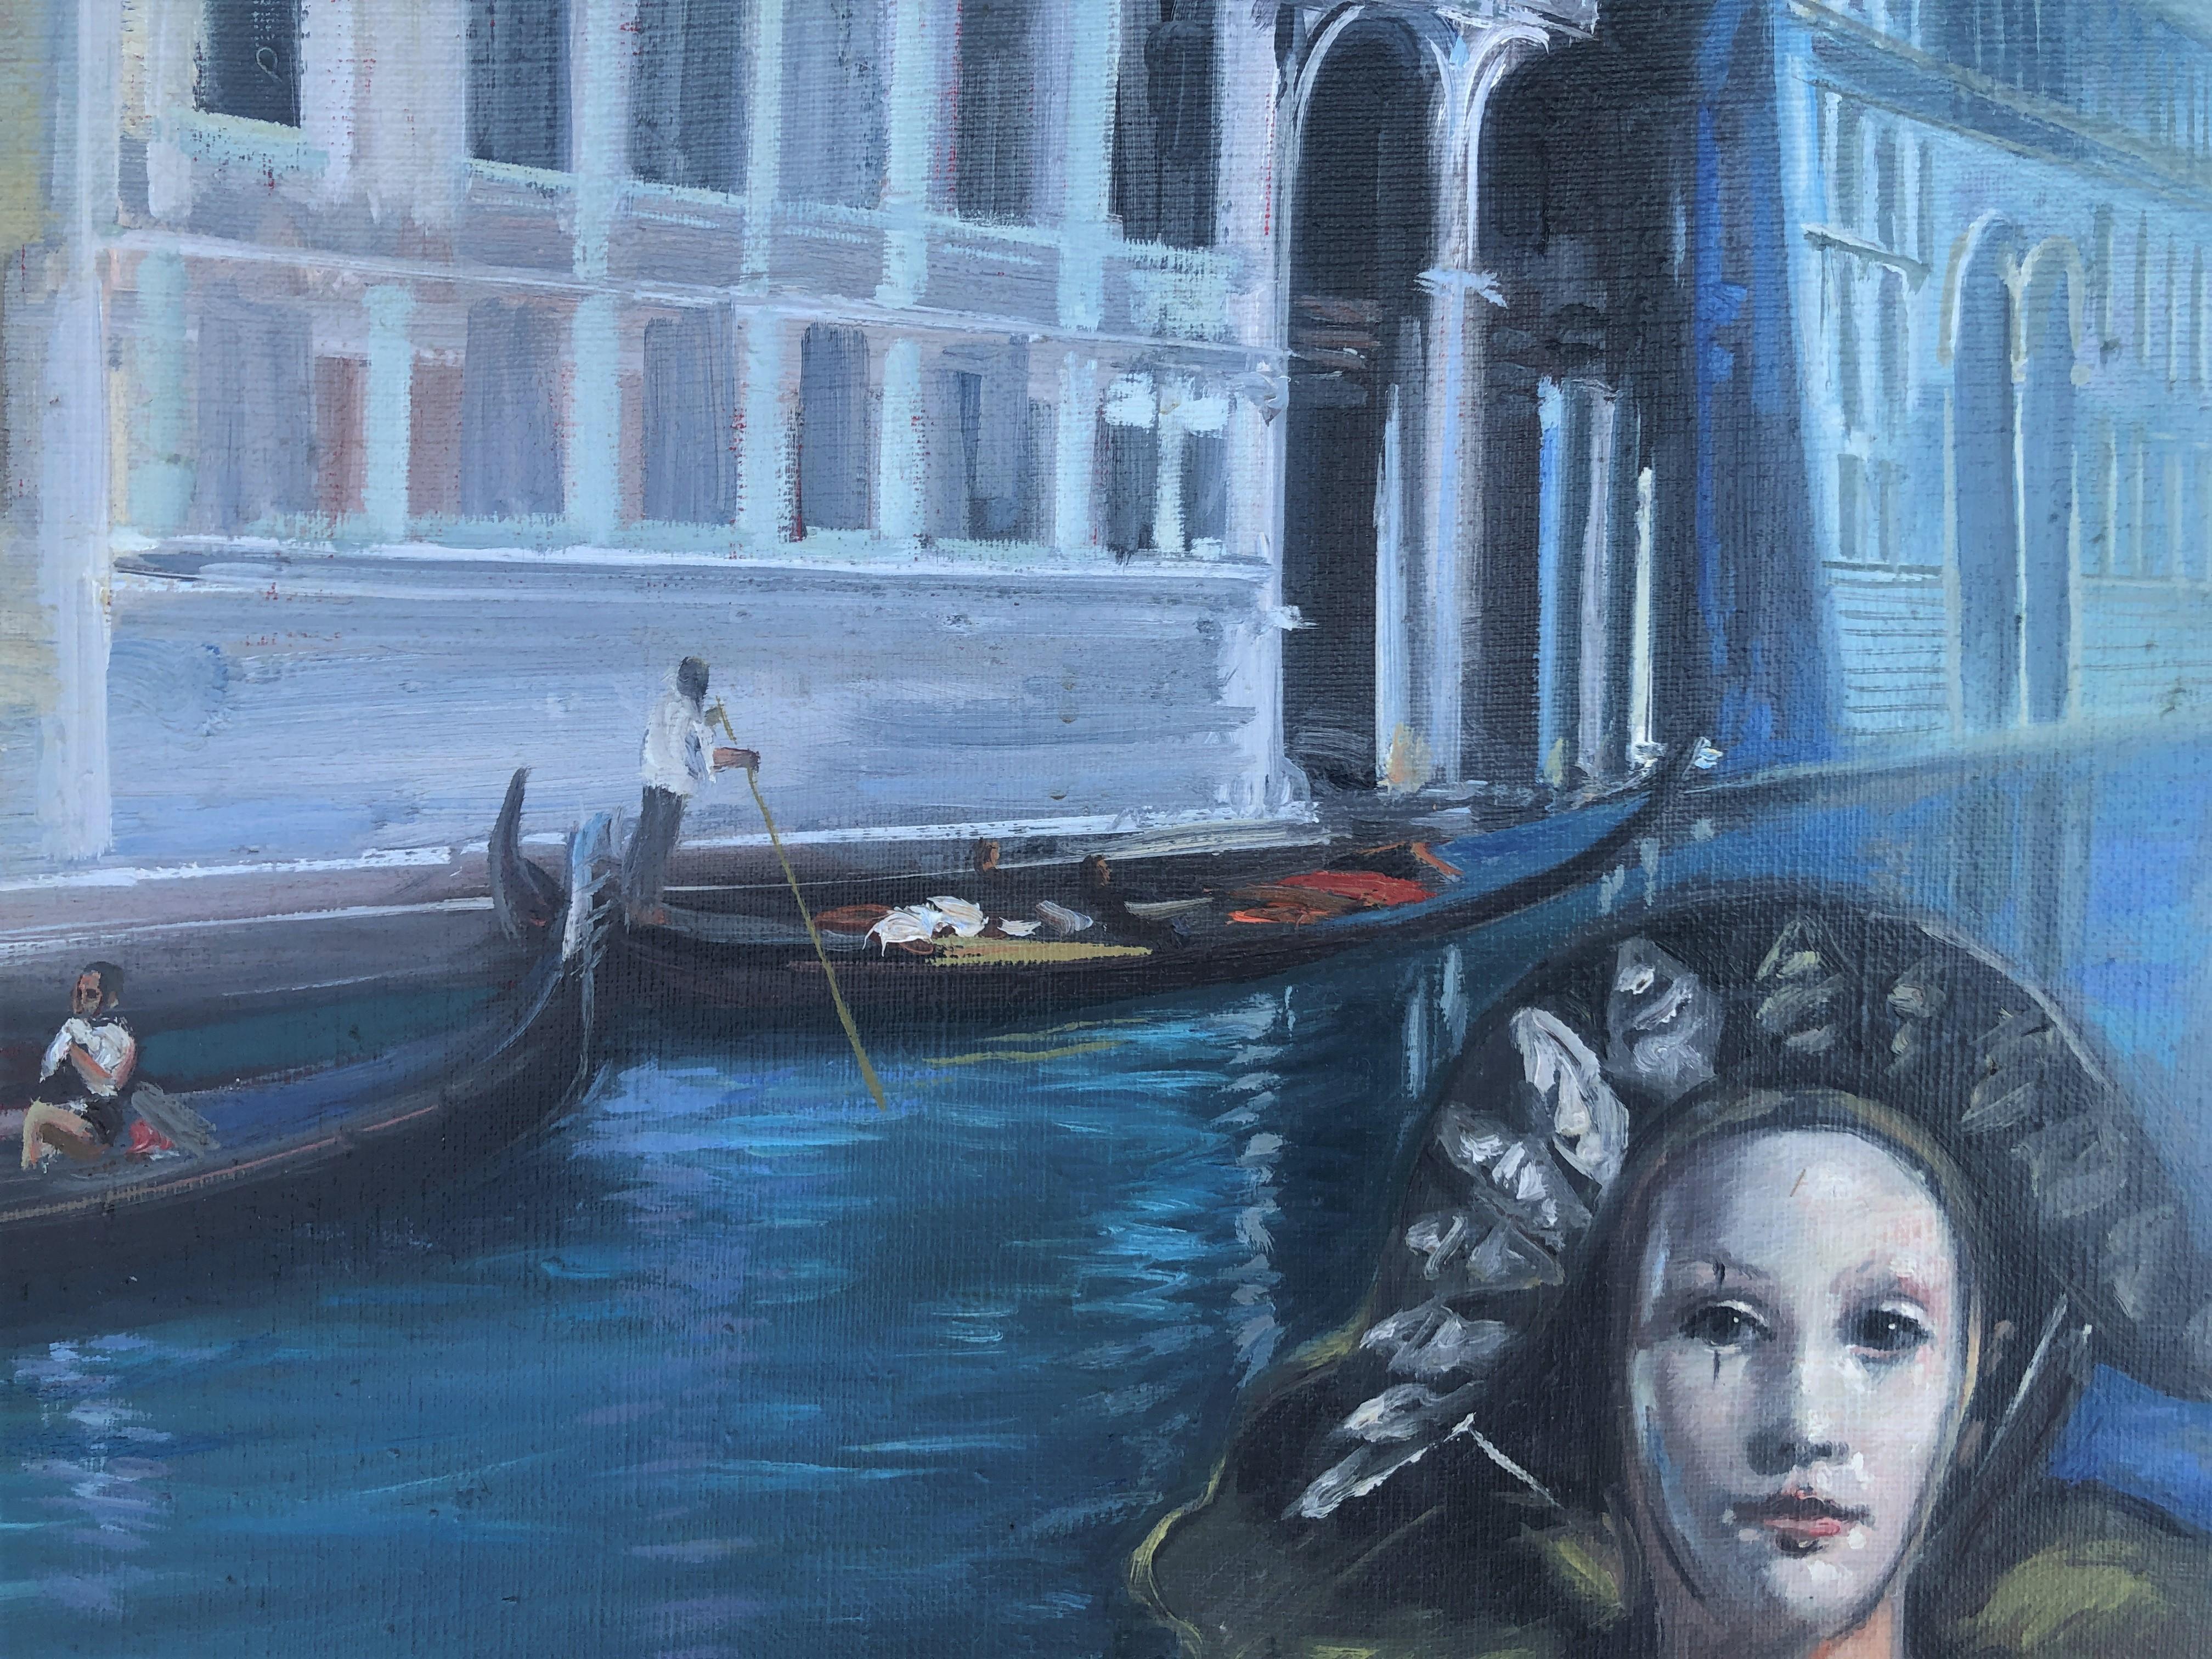 Venice's Carnival oil on canvas painting - Expressionist Painting by Antonio Alegre Cremades